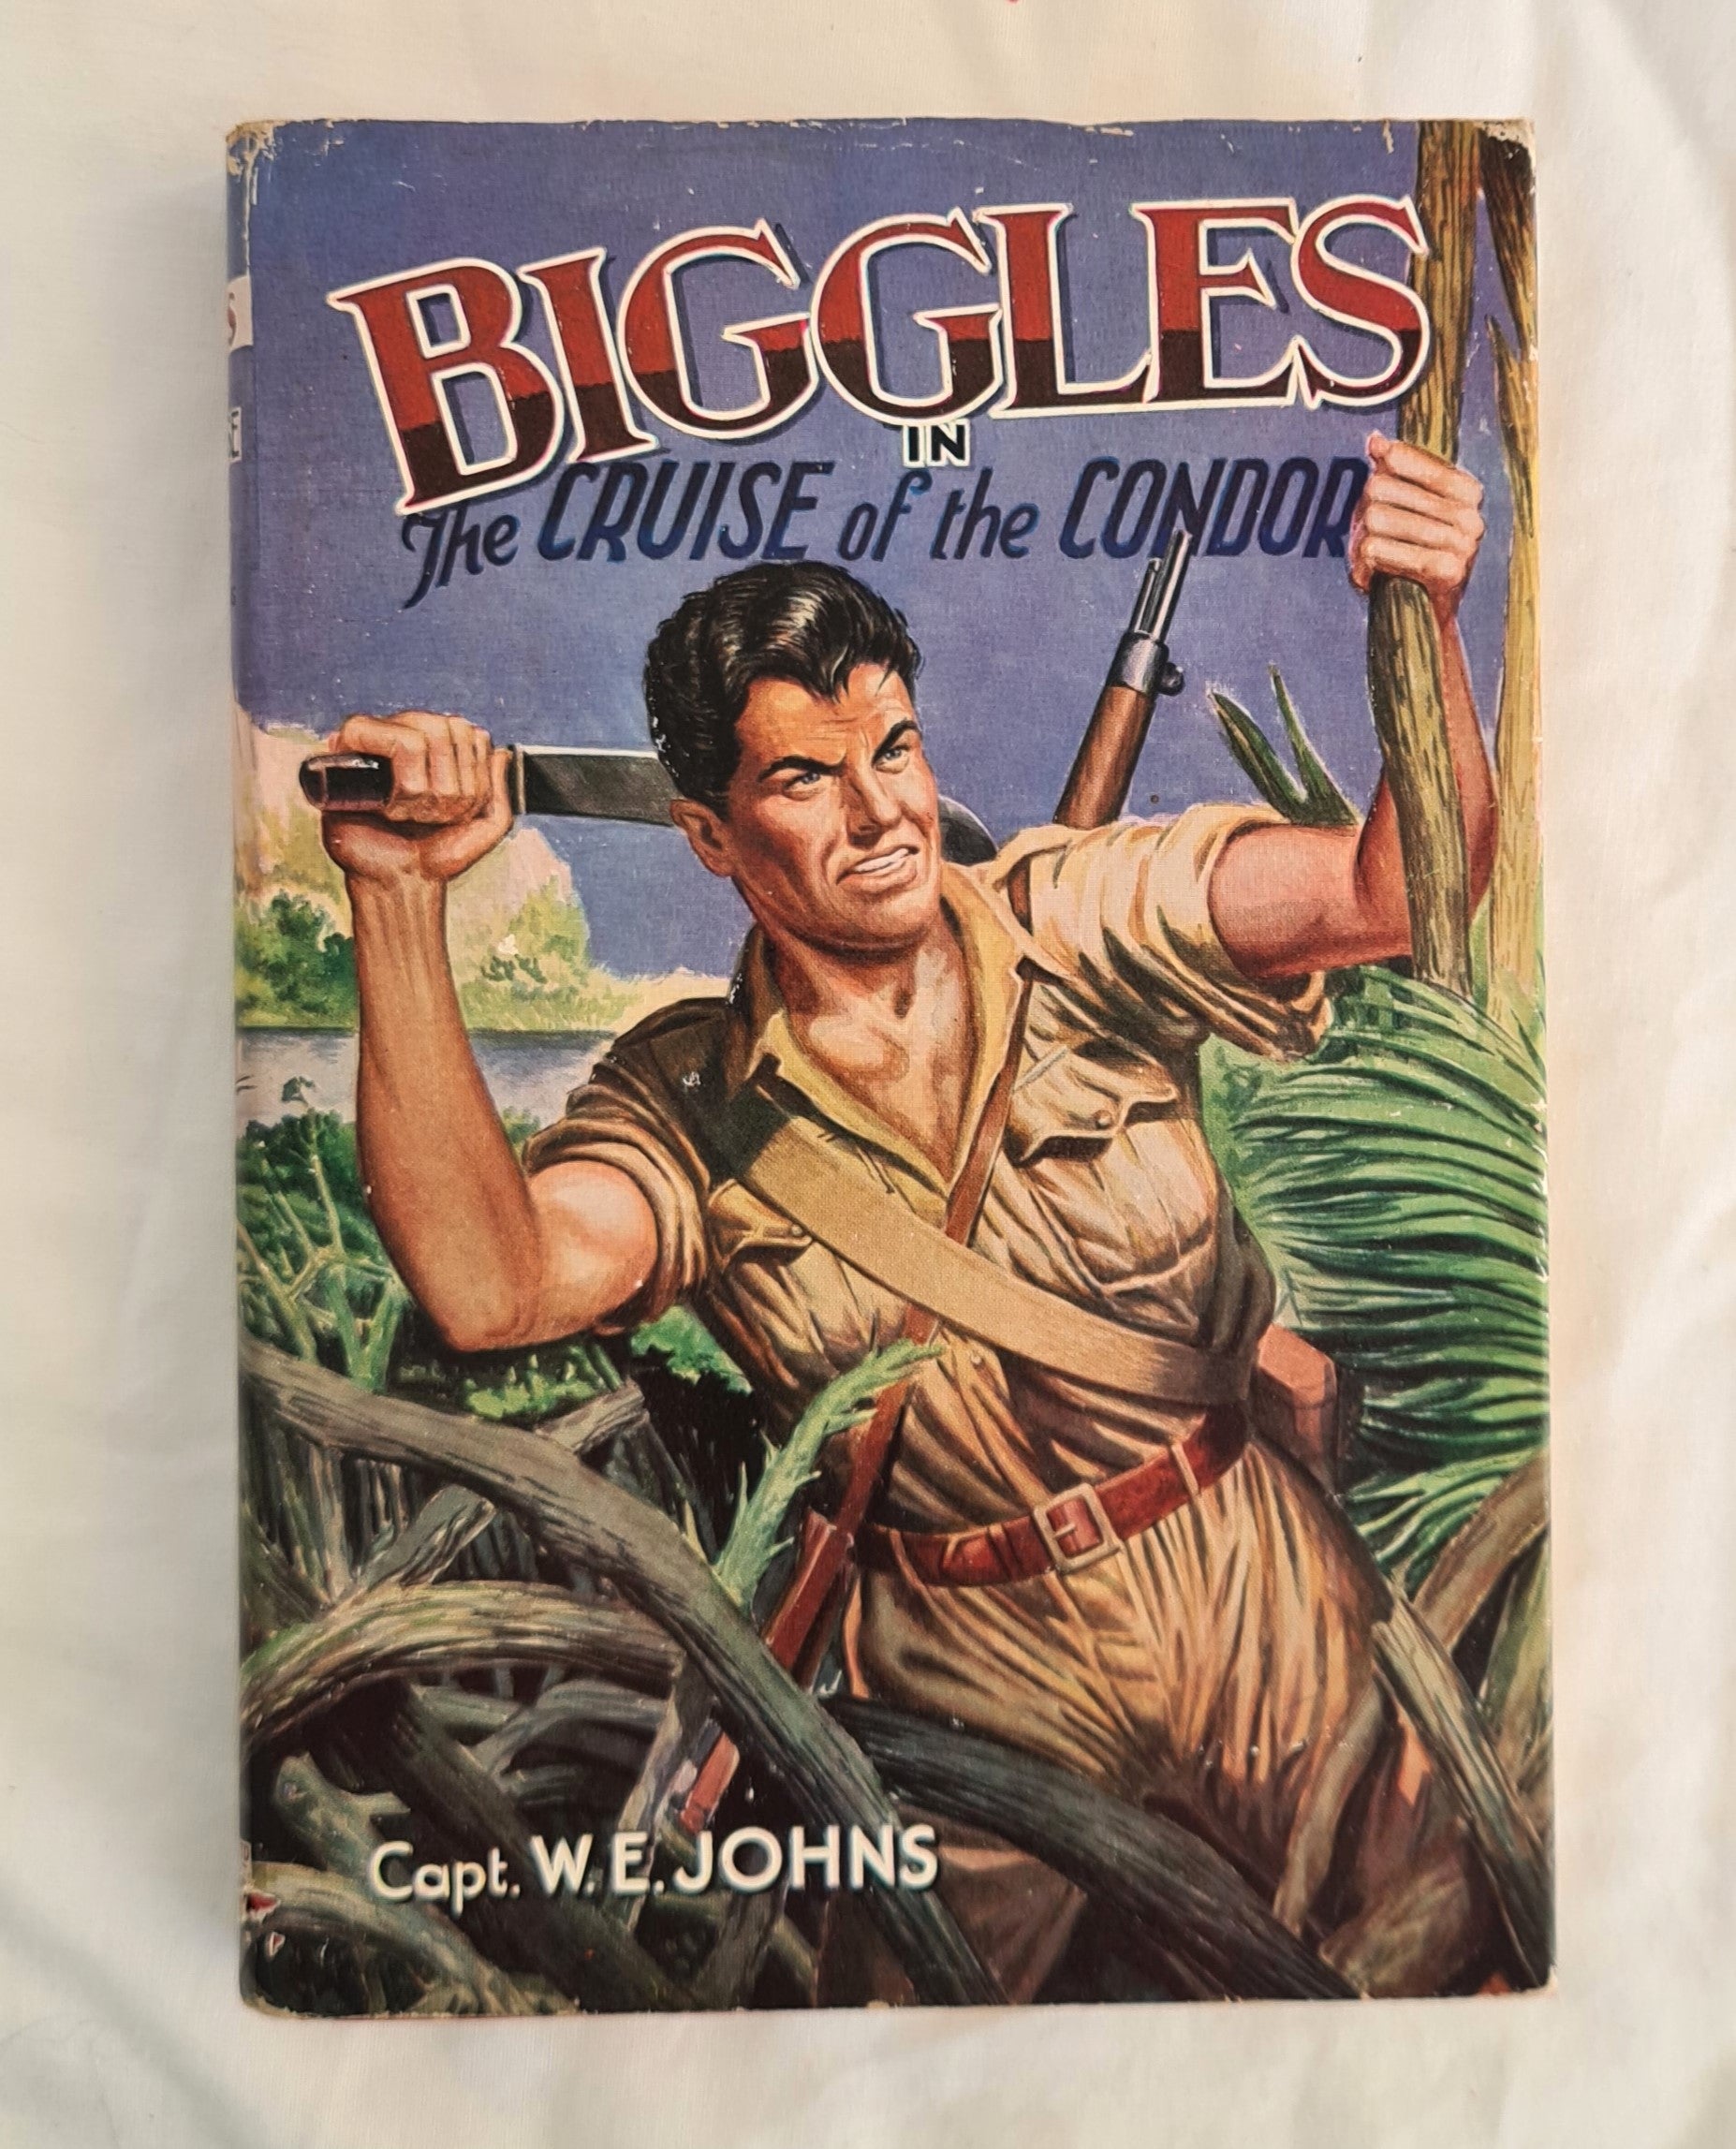 Biggles in the Cruise of the Condor by Capt. W. E. Johns